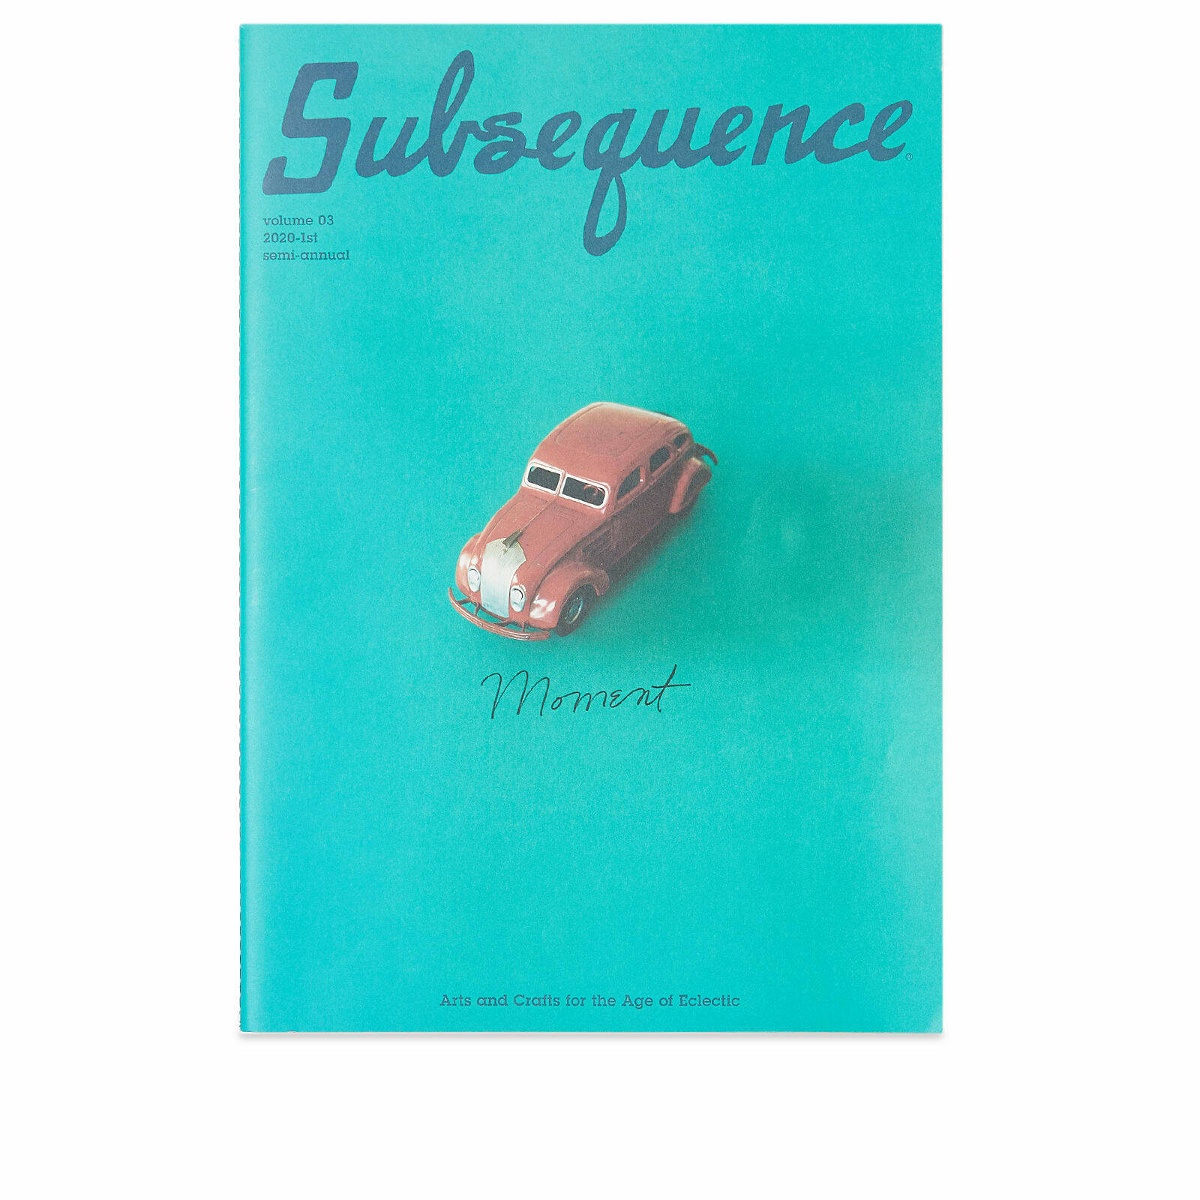 Photo: Publications Subsequence Magazine in Vol.3